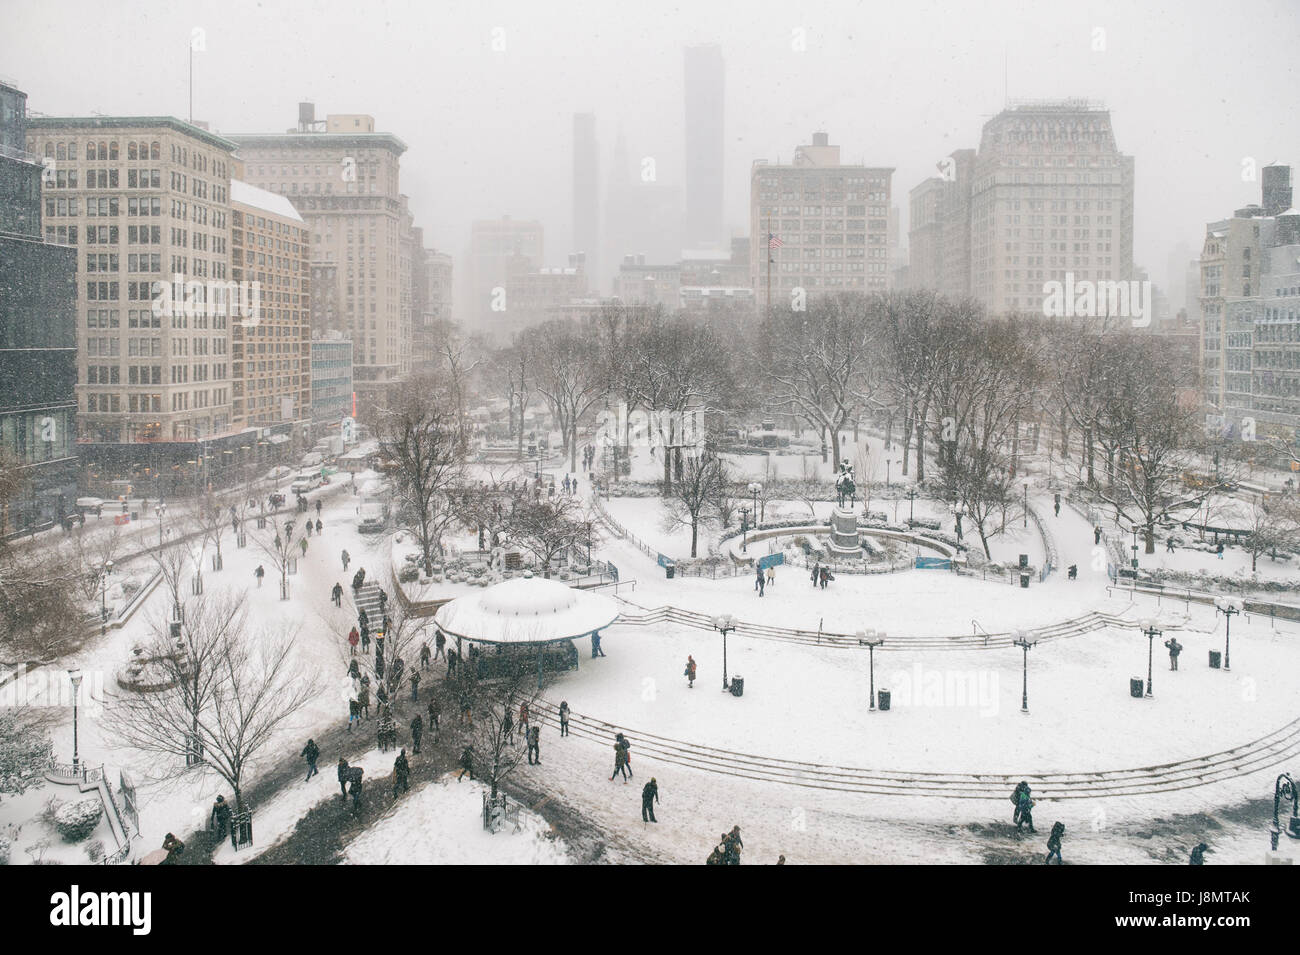 Snowy winter scene with trails left by pedestrians in the snow in Union Square as a blizzard overtakes New York City Stock Photo